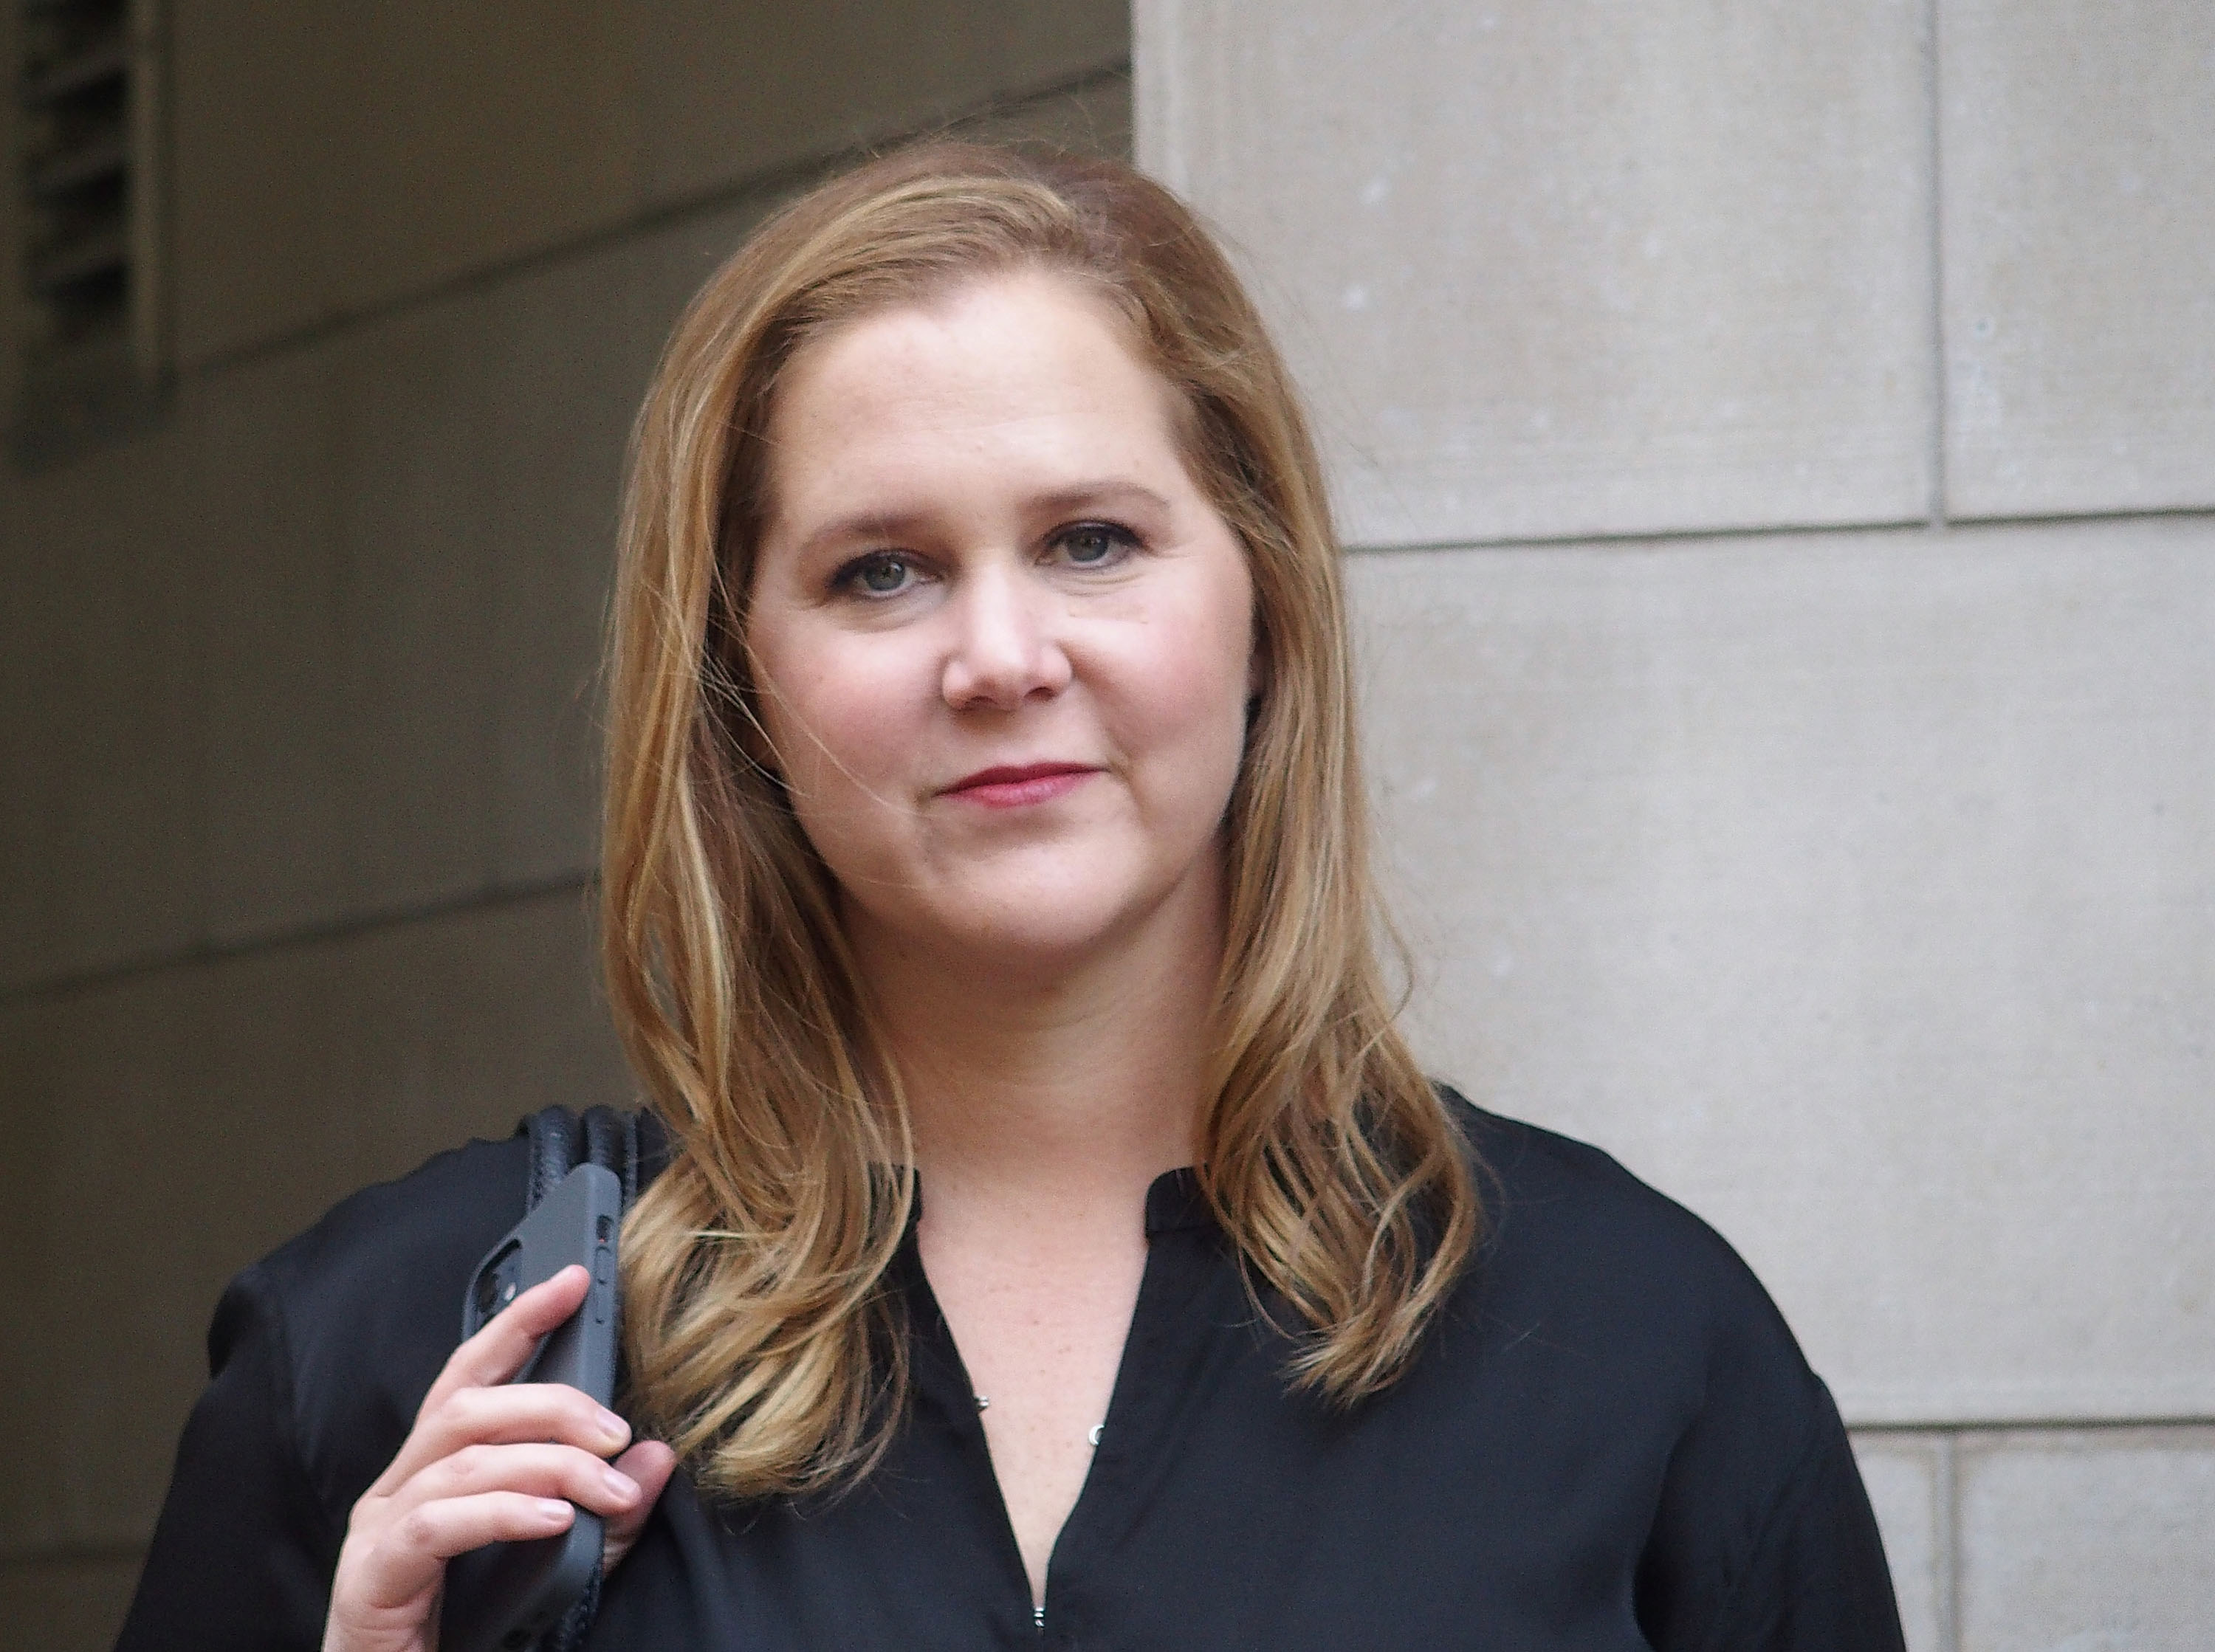 Amy Schumer holding her cellphone.